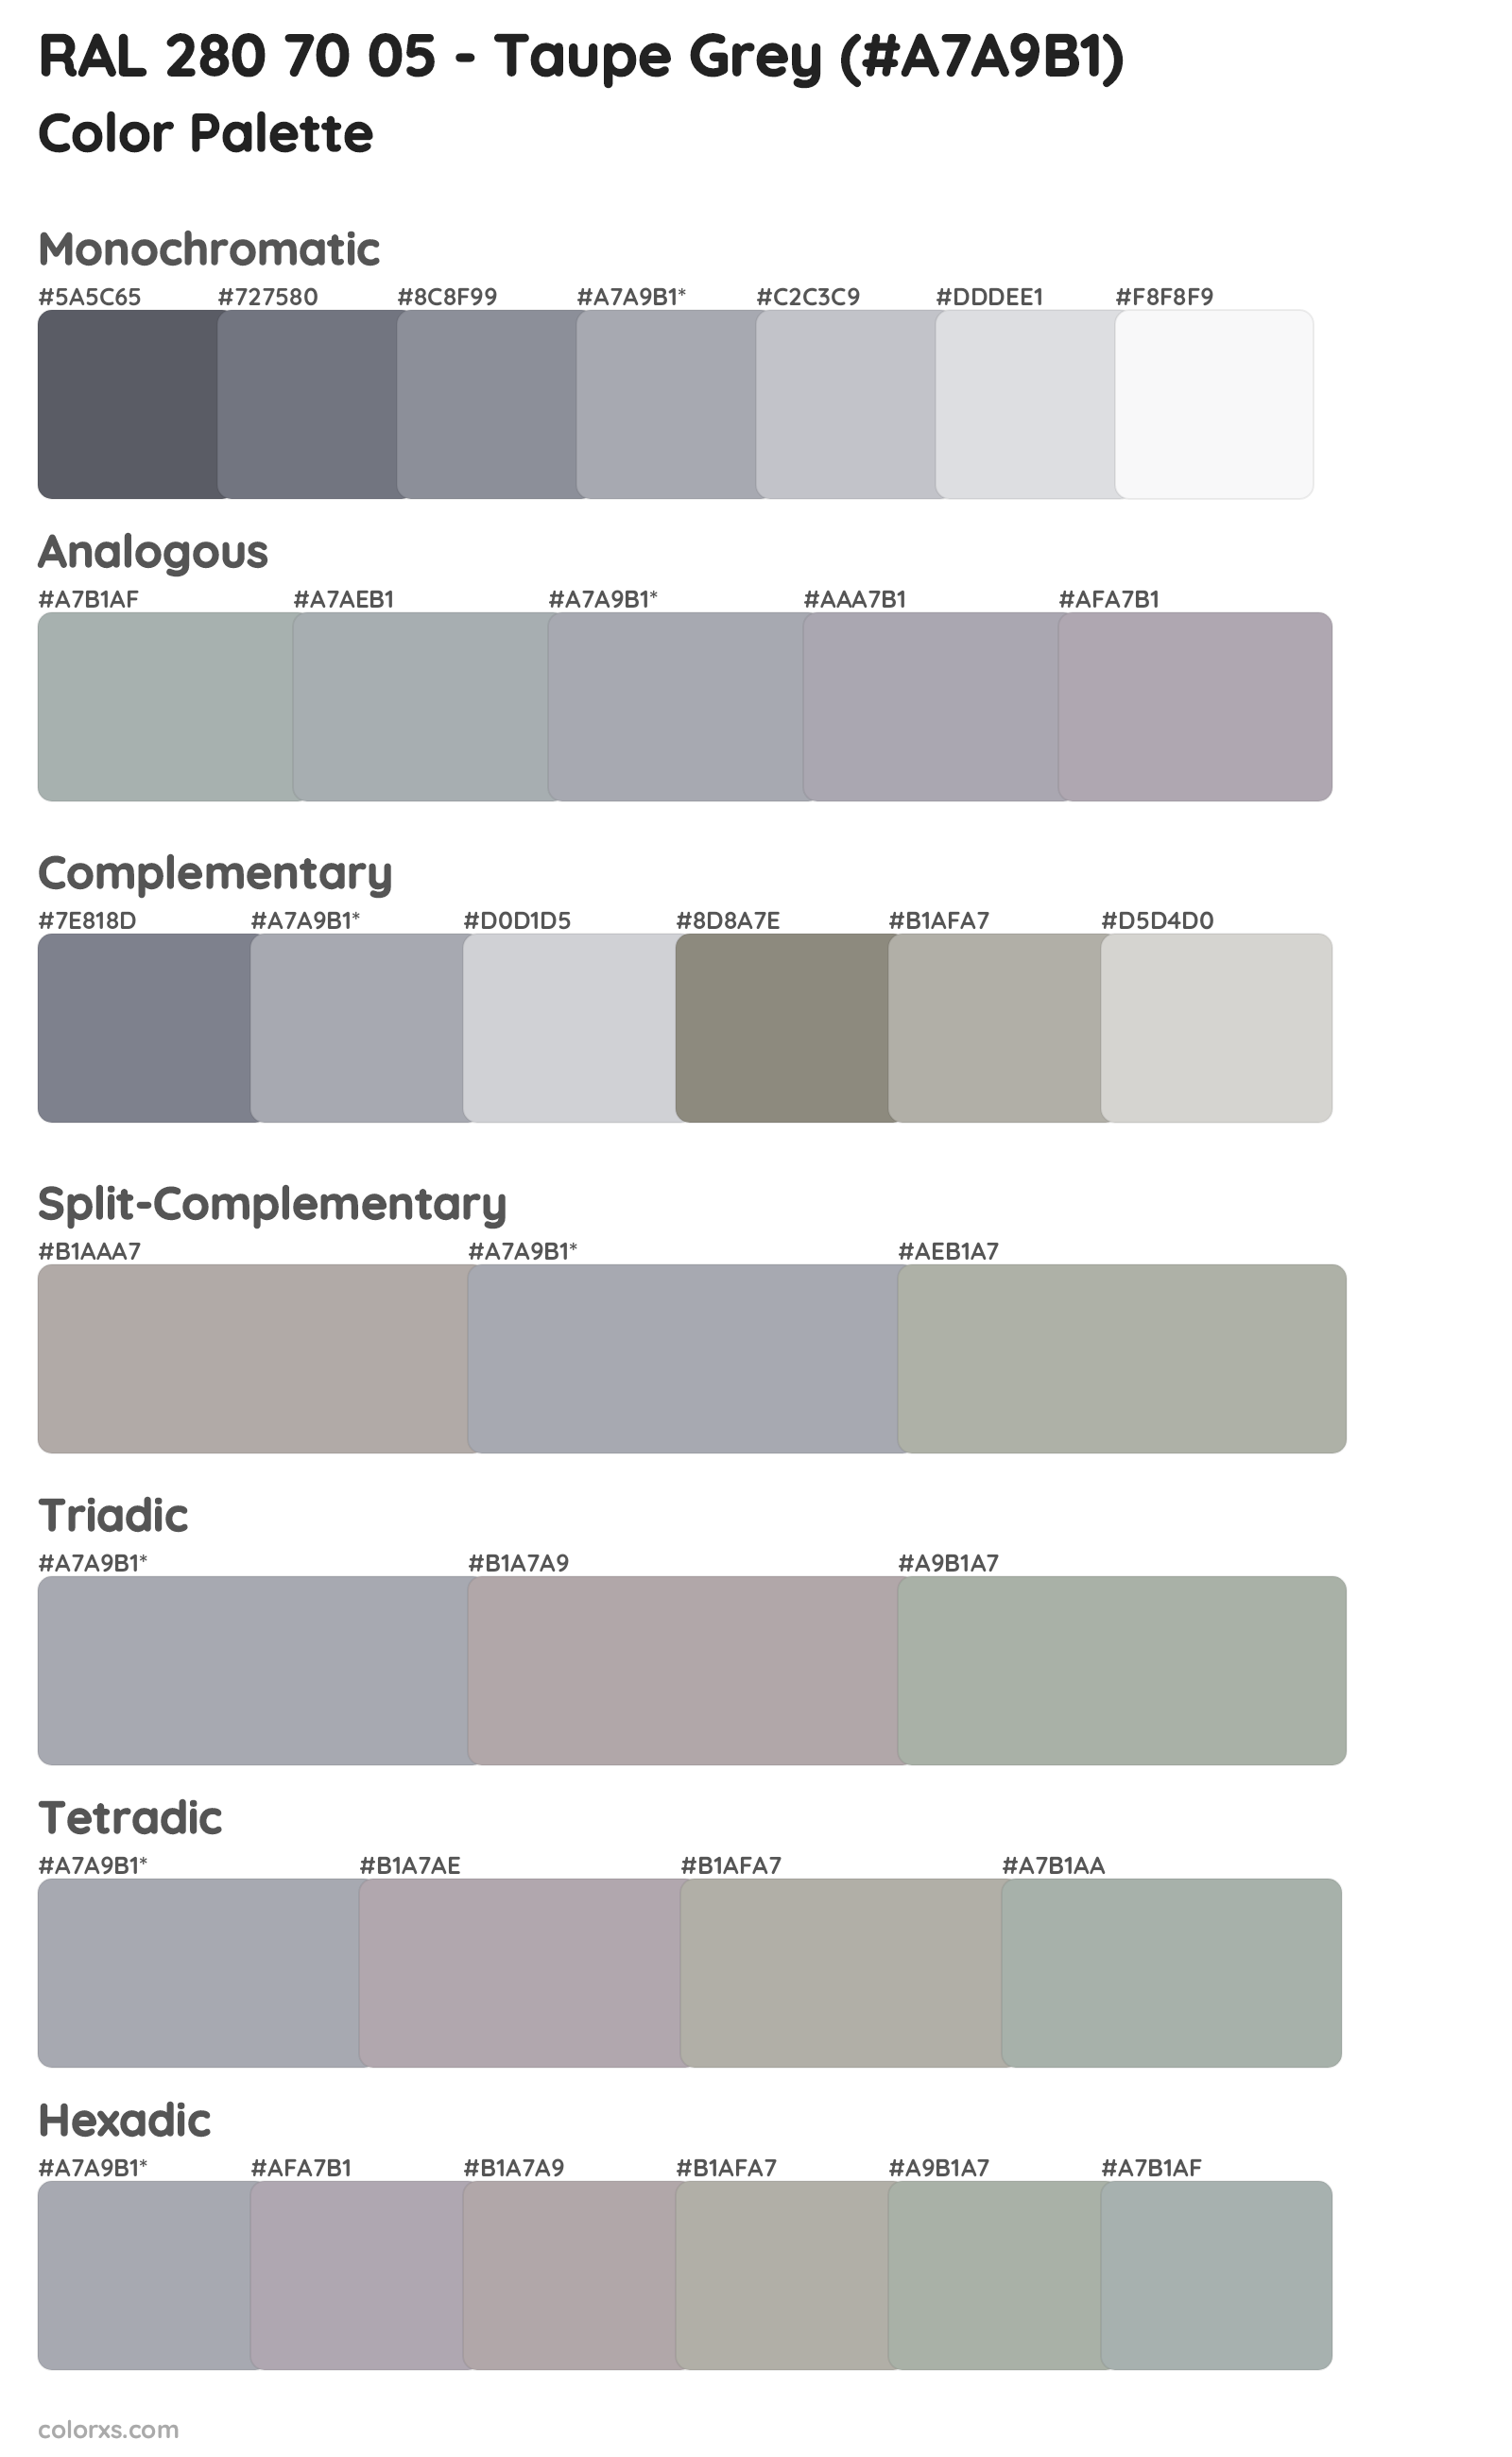 RAL 280 70 05 - Taupe Grey Color Scheme Palettes